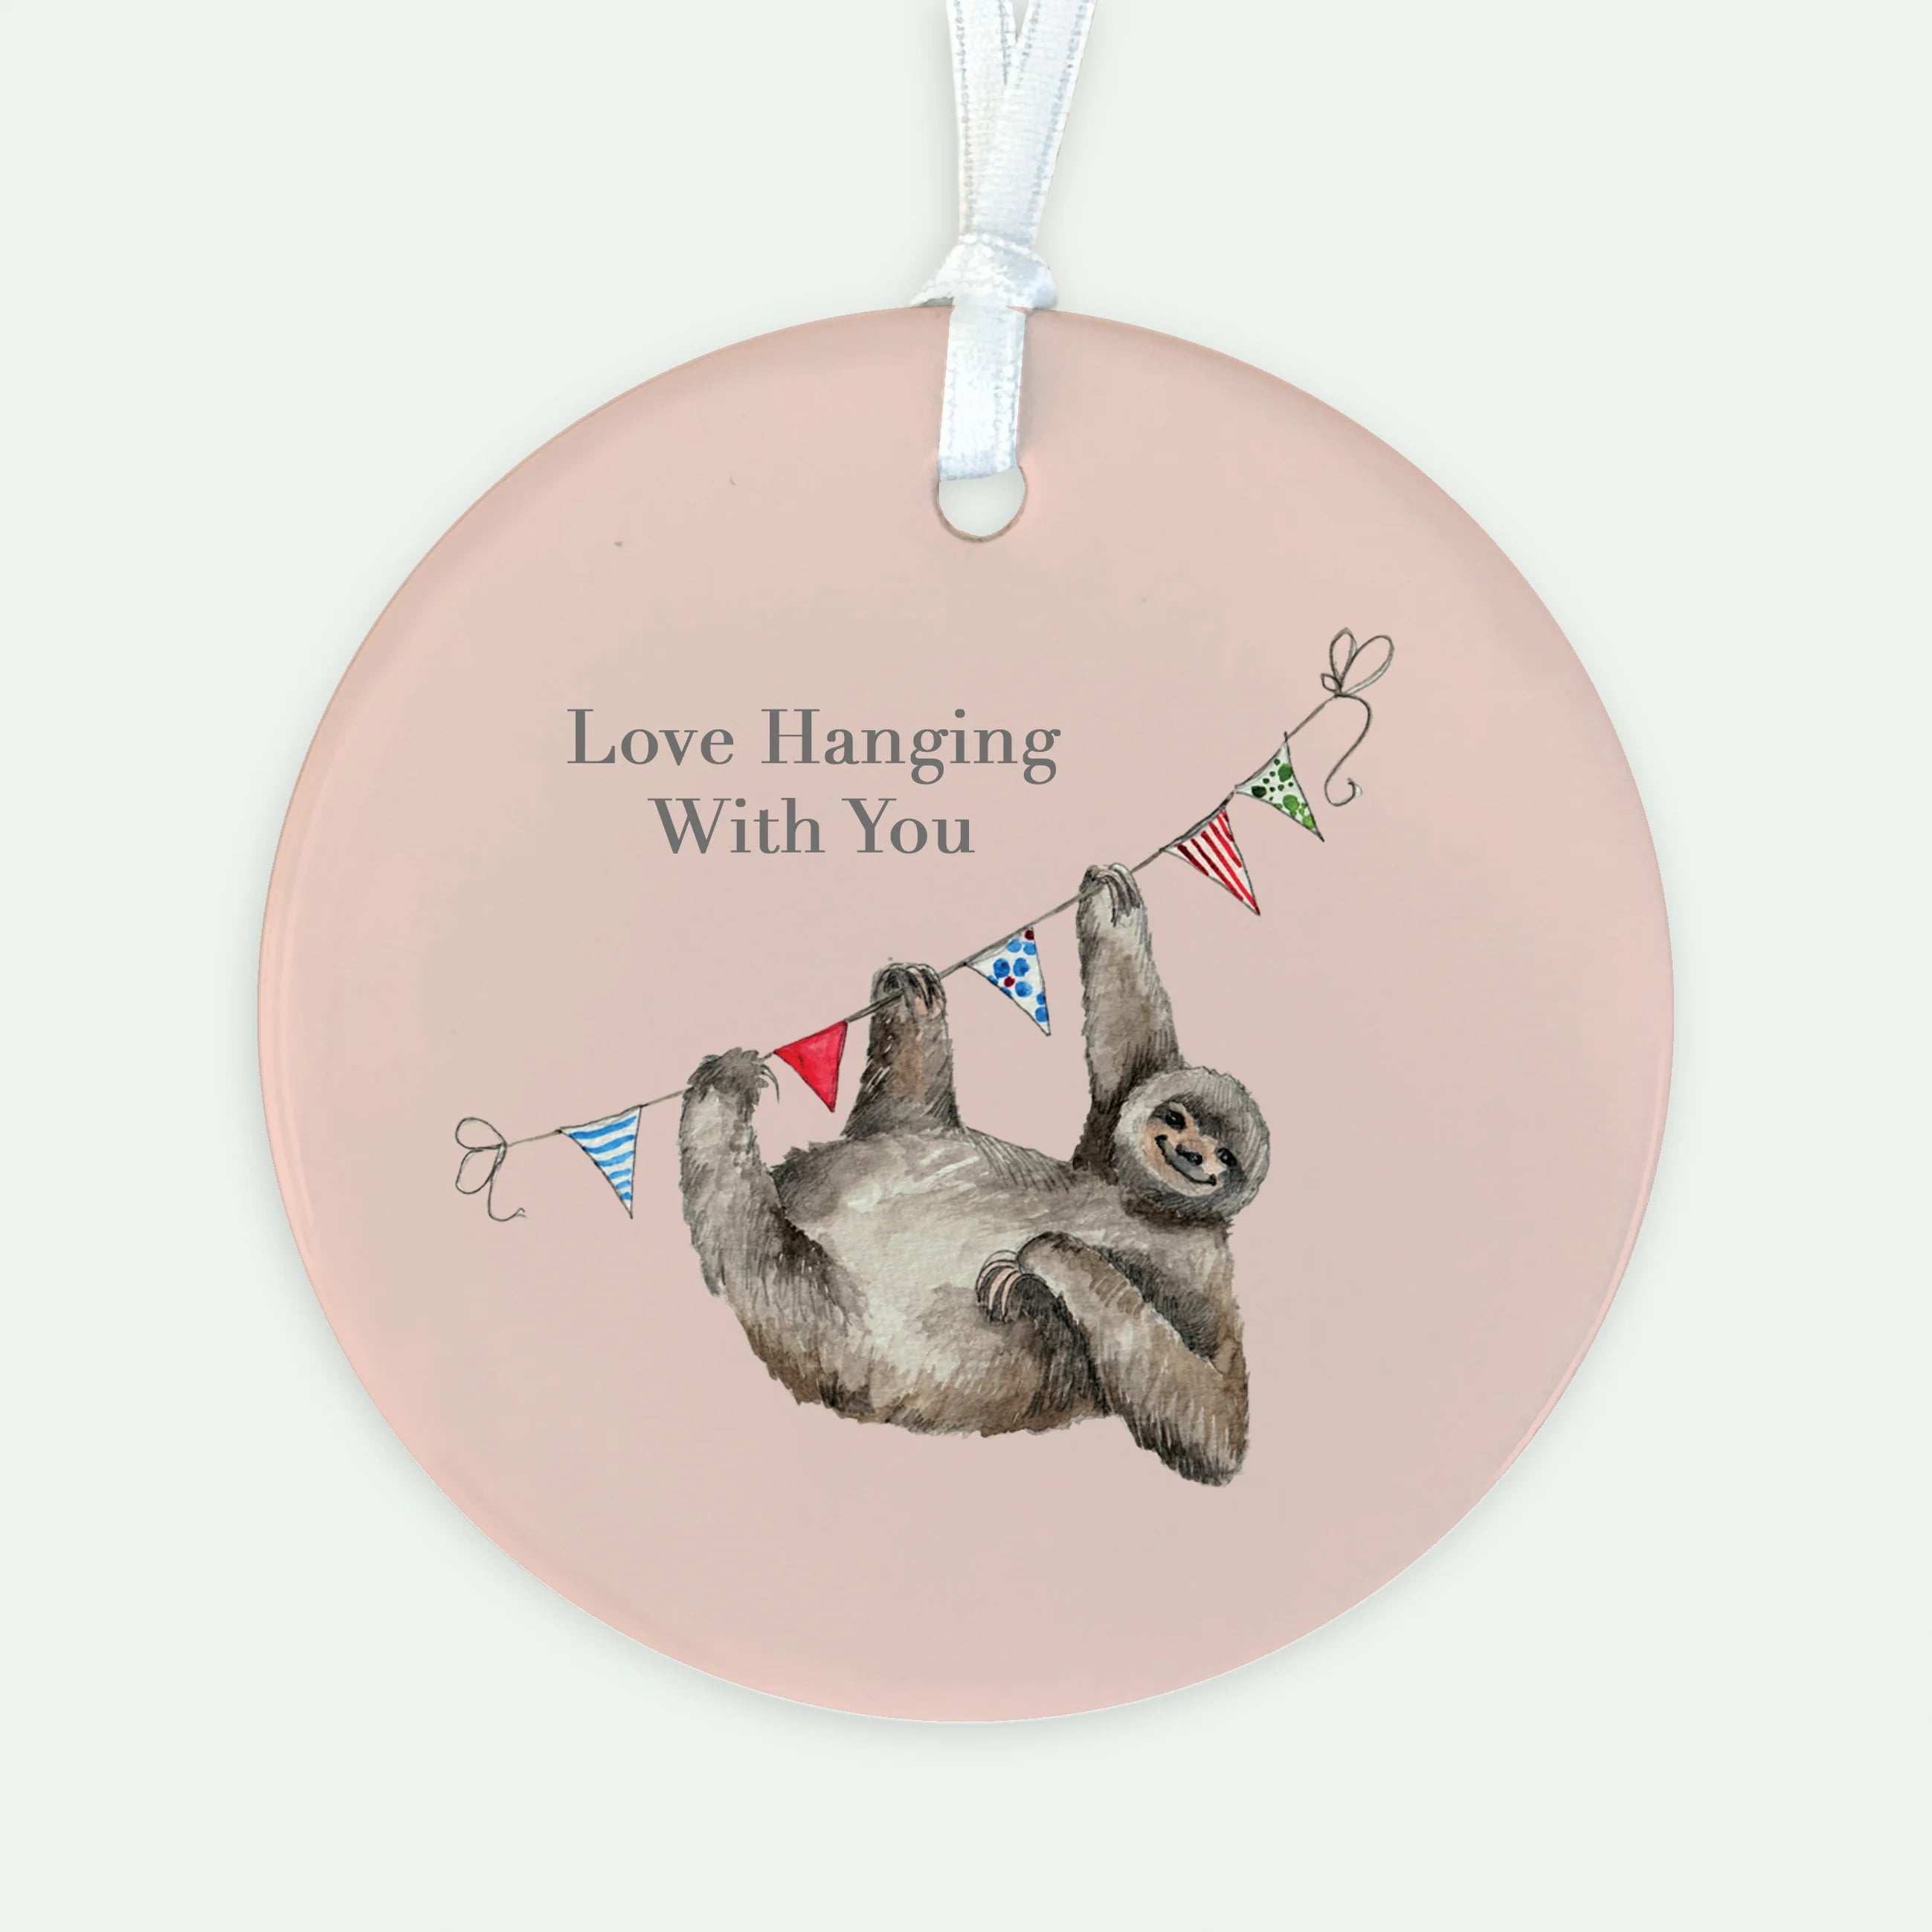 Fabulous Gifts Crumble & Core Keepsake Sloth Love Hanging Card by Weirs of Baggot Street